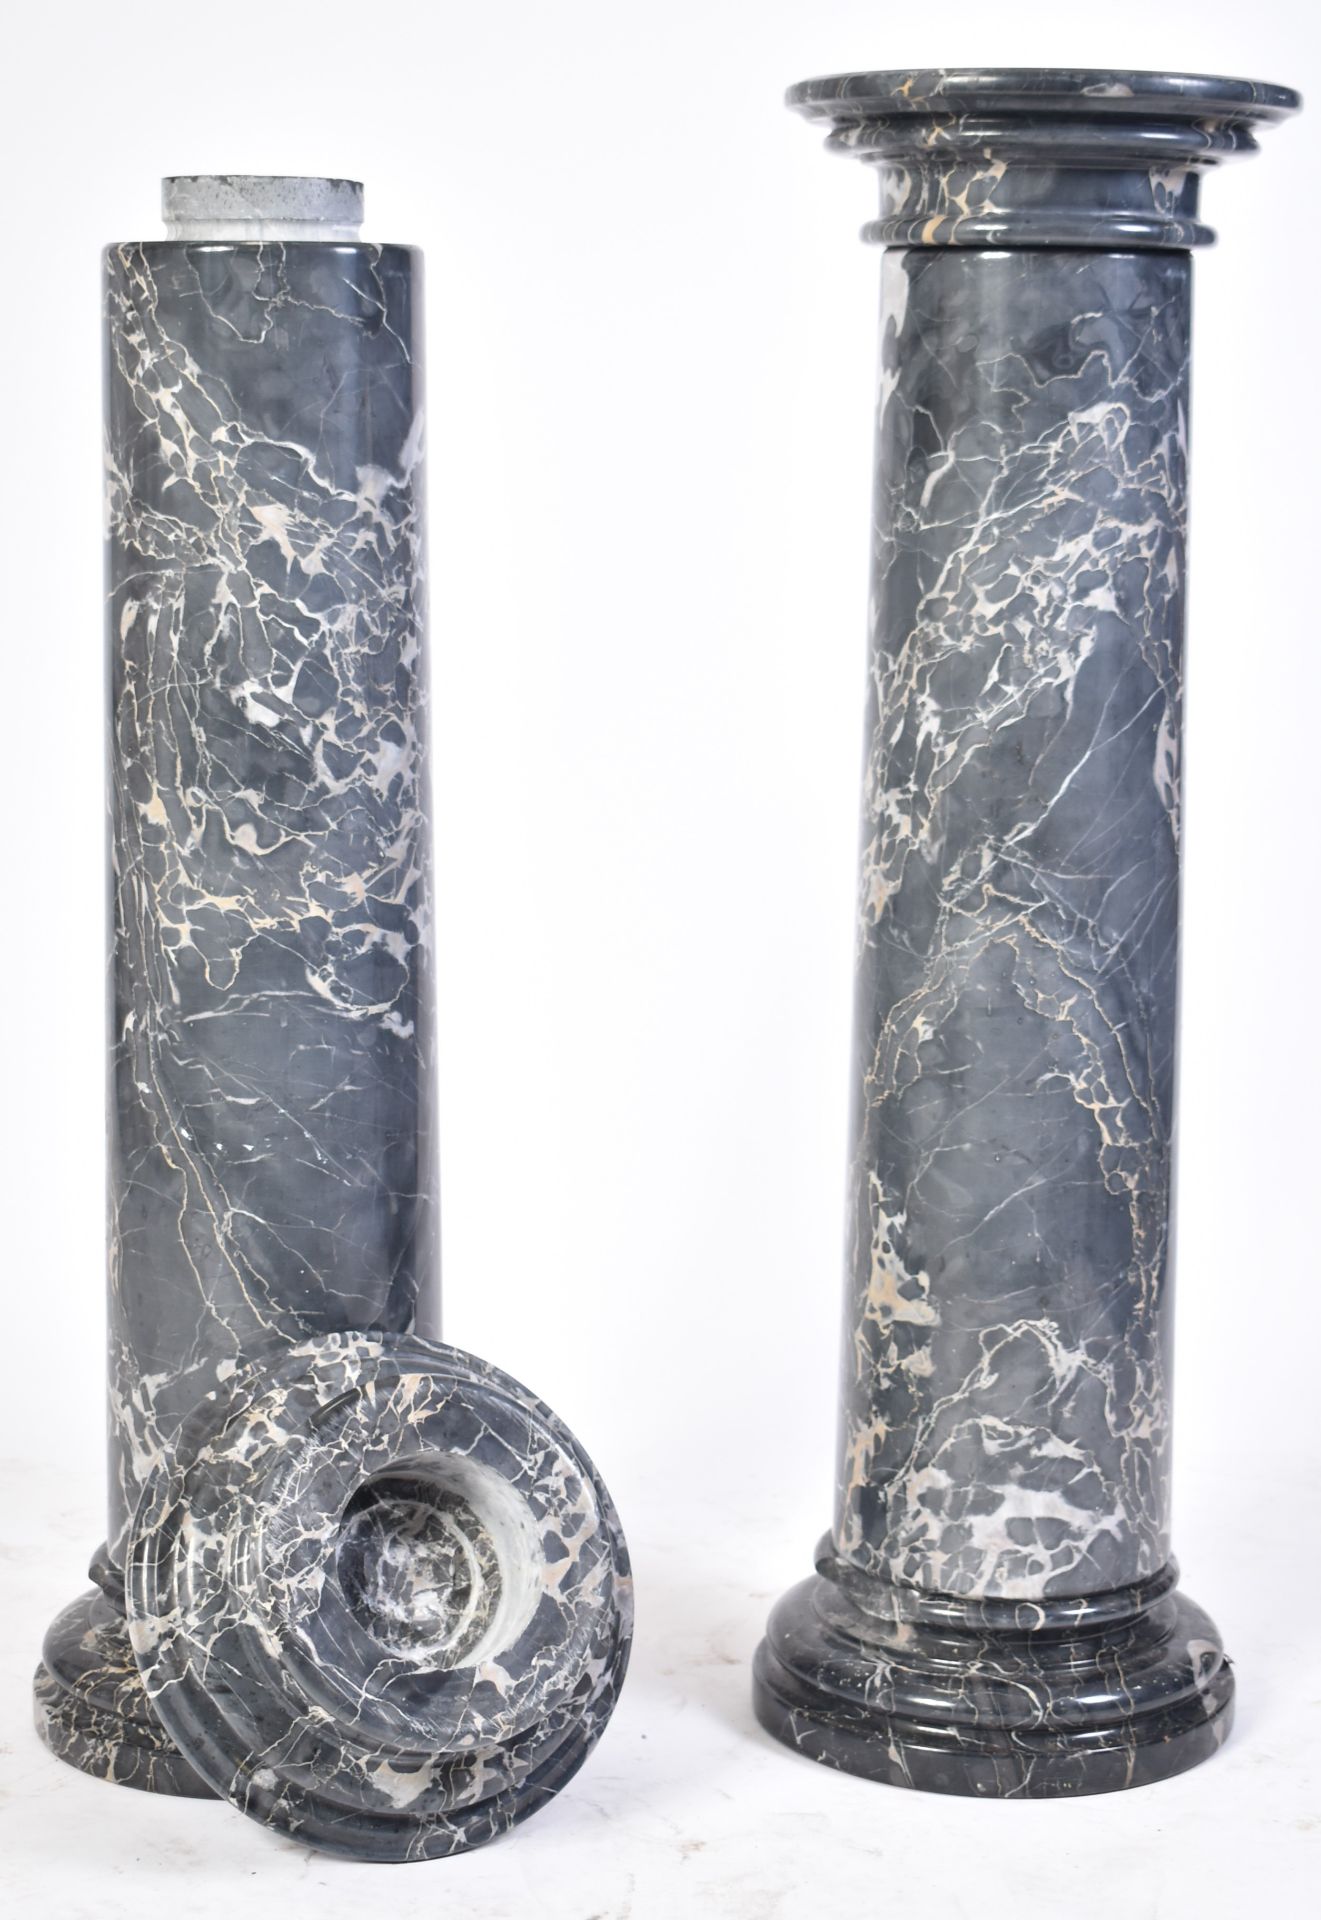 PAIR OF LARGE FREESTANDING GREY & WHITE MARBLE PEDESTALS - Image 7 of 12